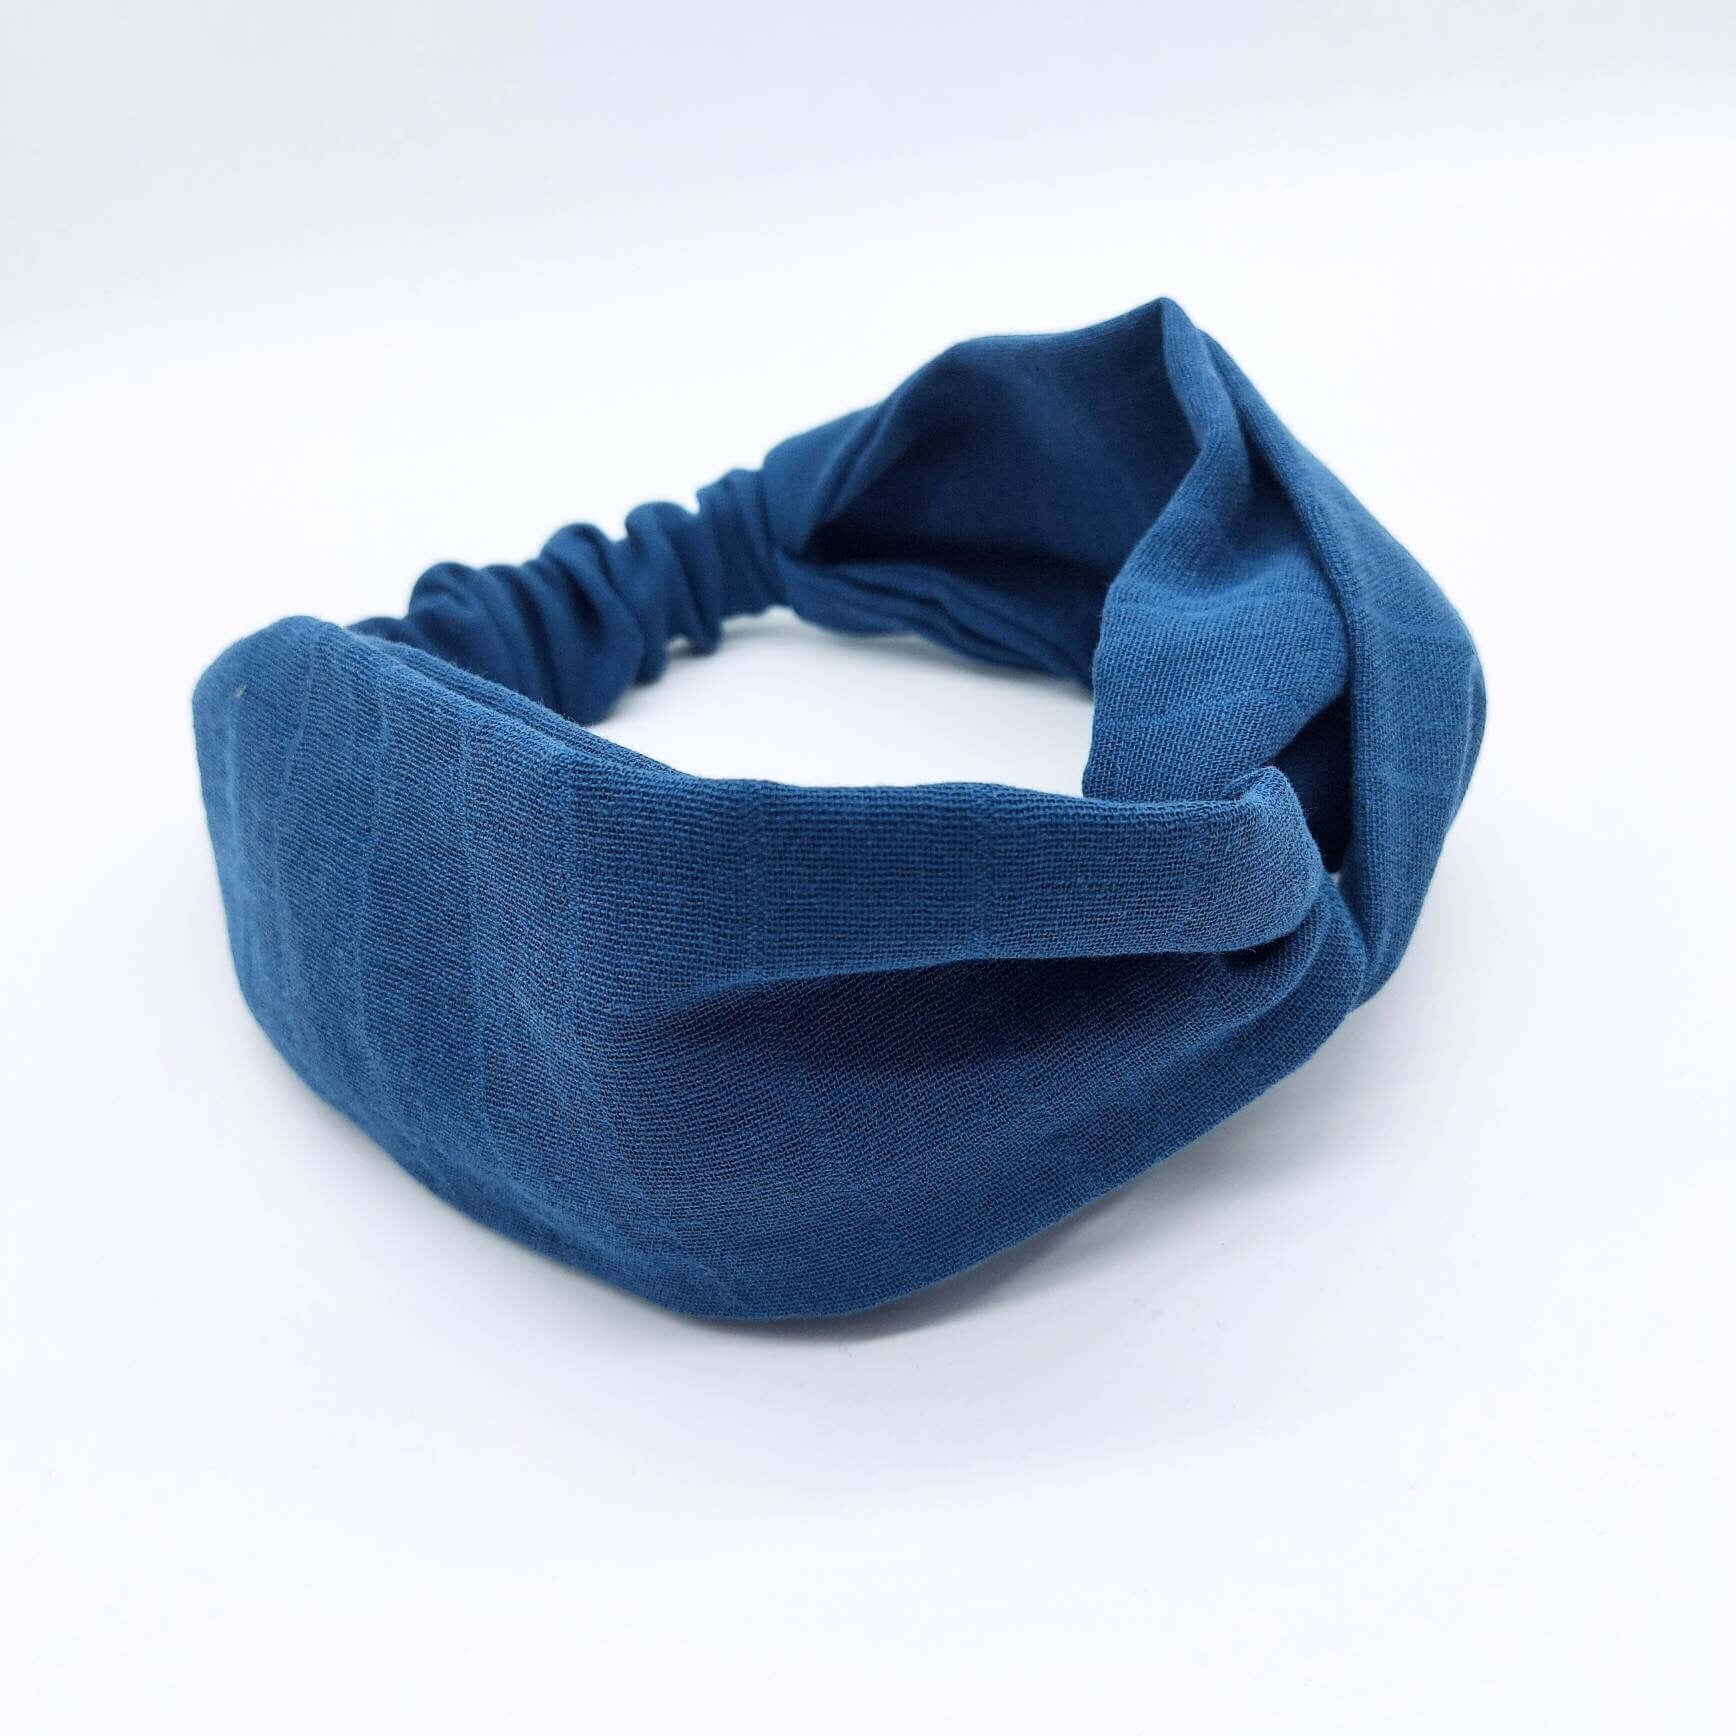 A soft, teal blue, muslin cotton, turban twist headband with an elasticated panel at the back.